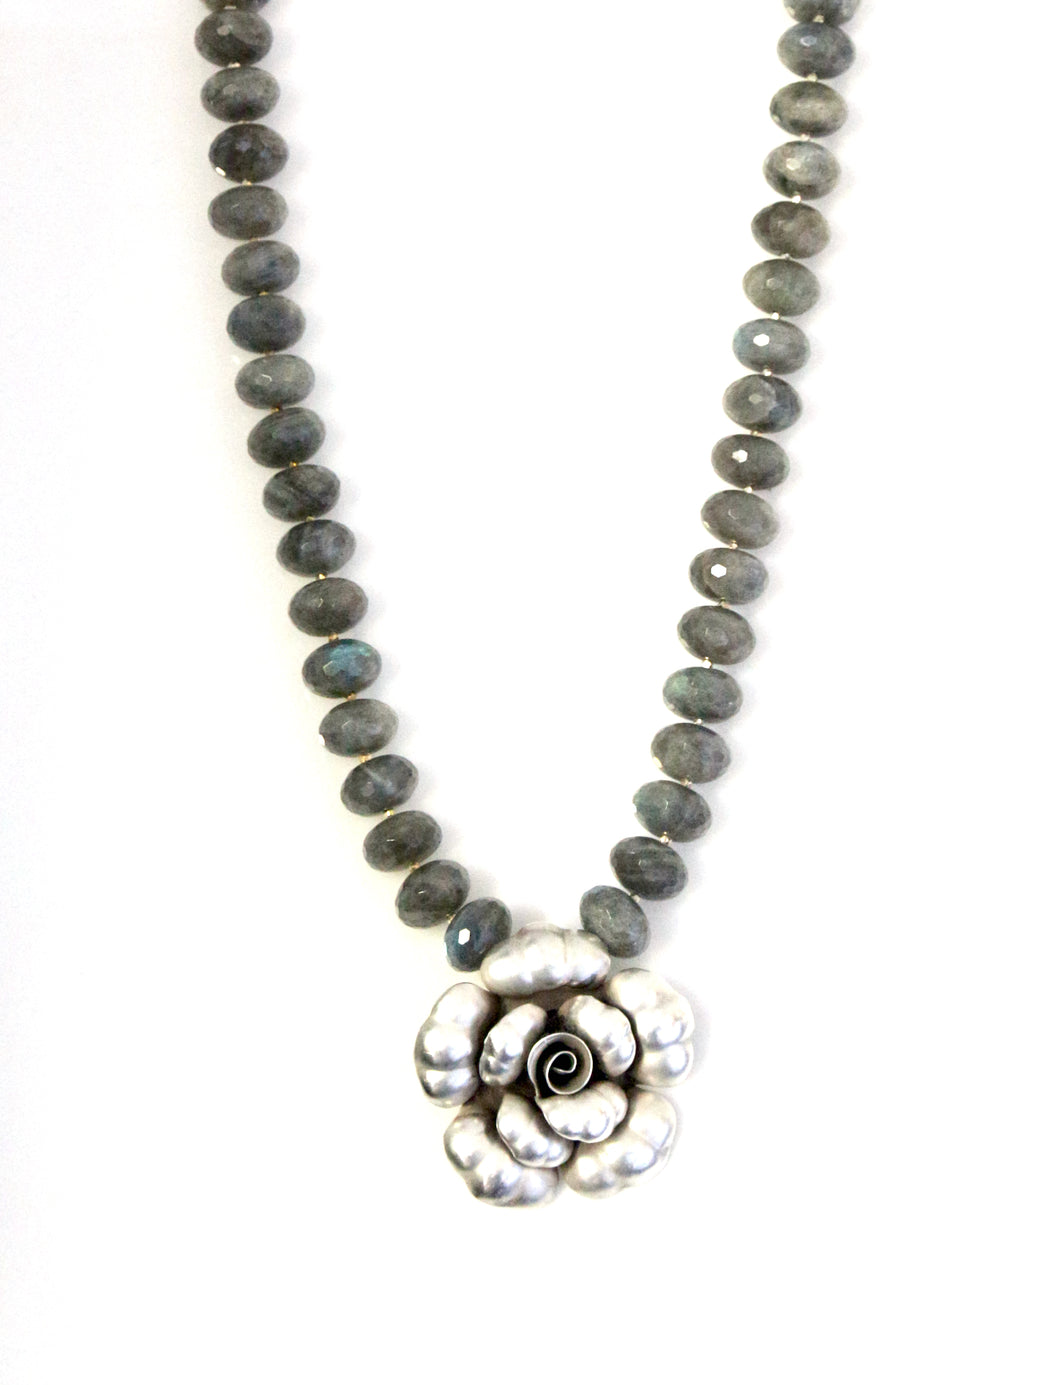 Australian Handmade Grey Necklace with Labradorite and Sterling Silver